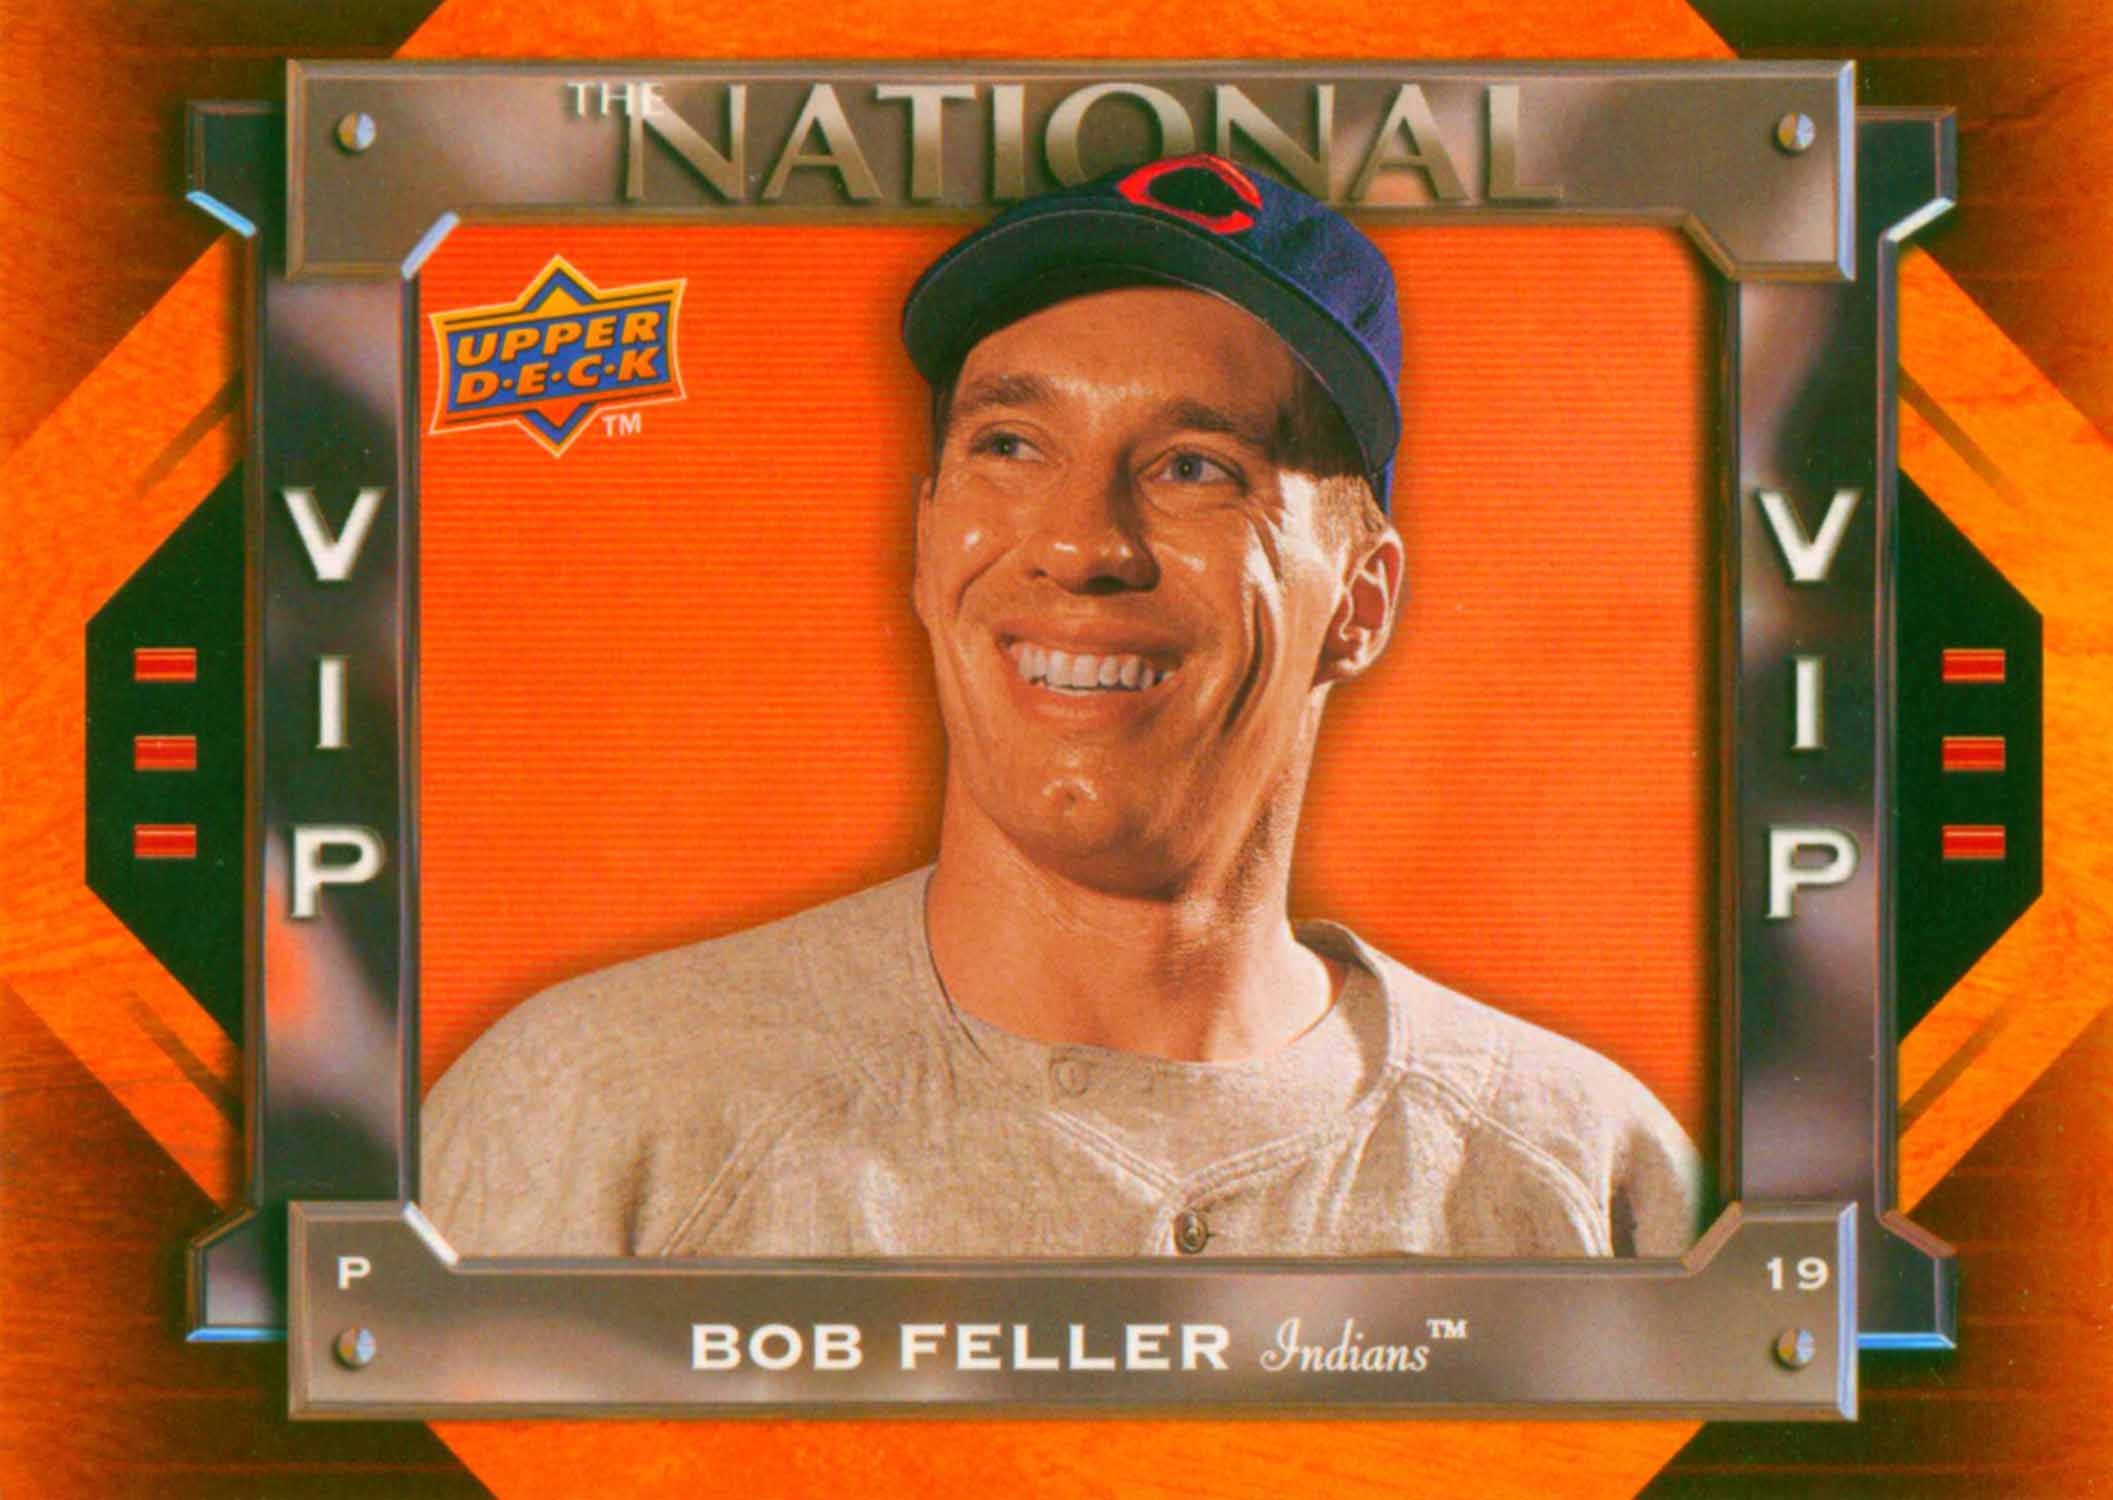 2009 Upper Deck National Convention VIP